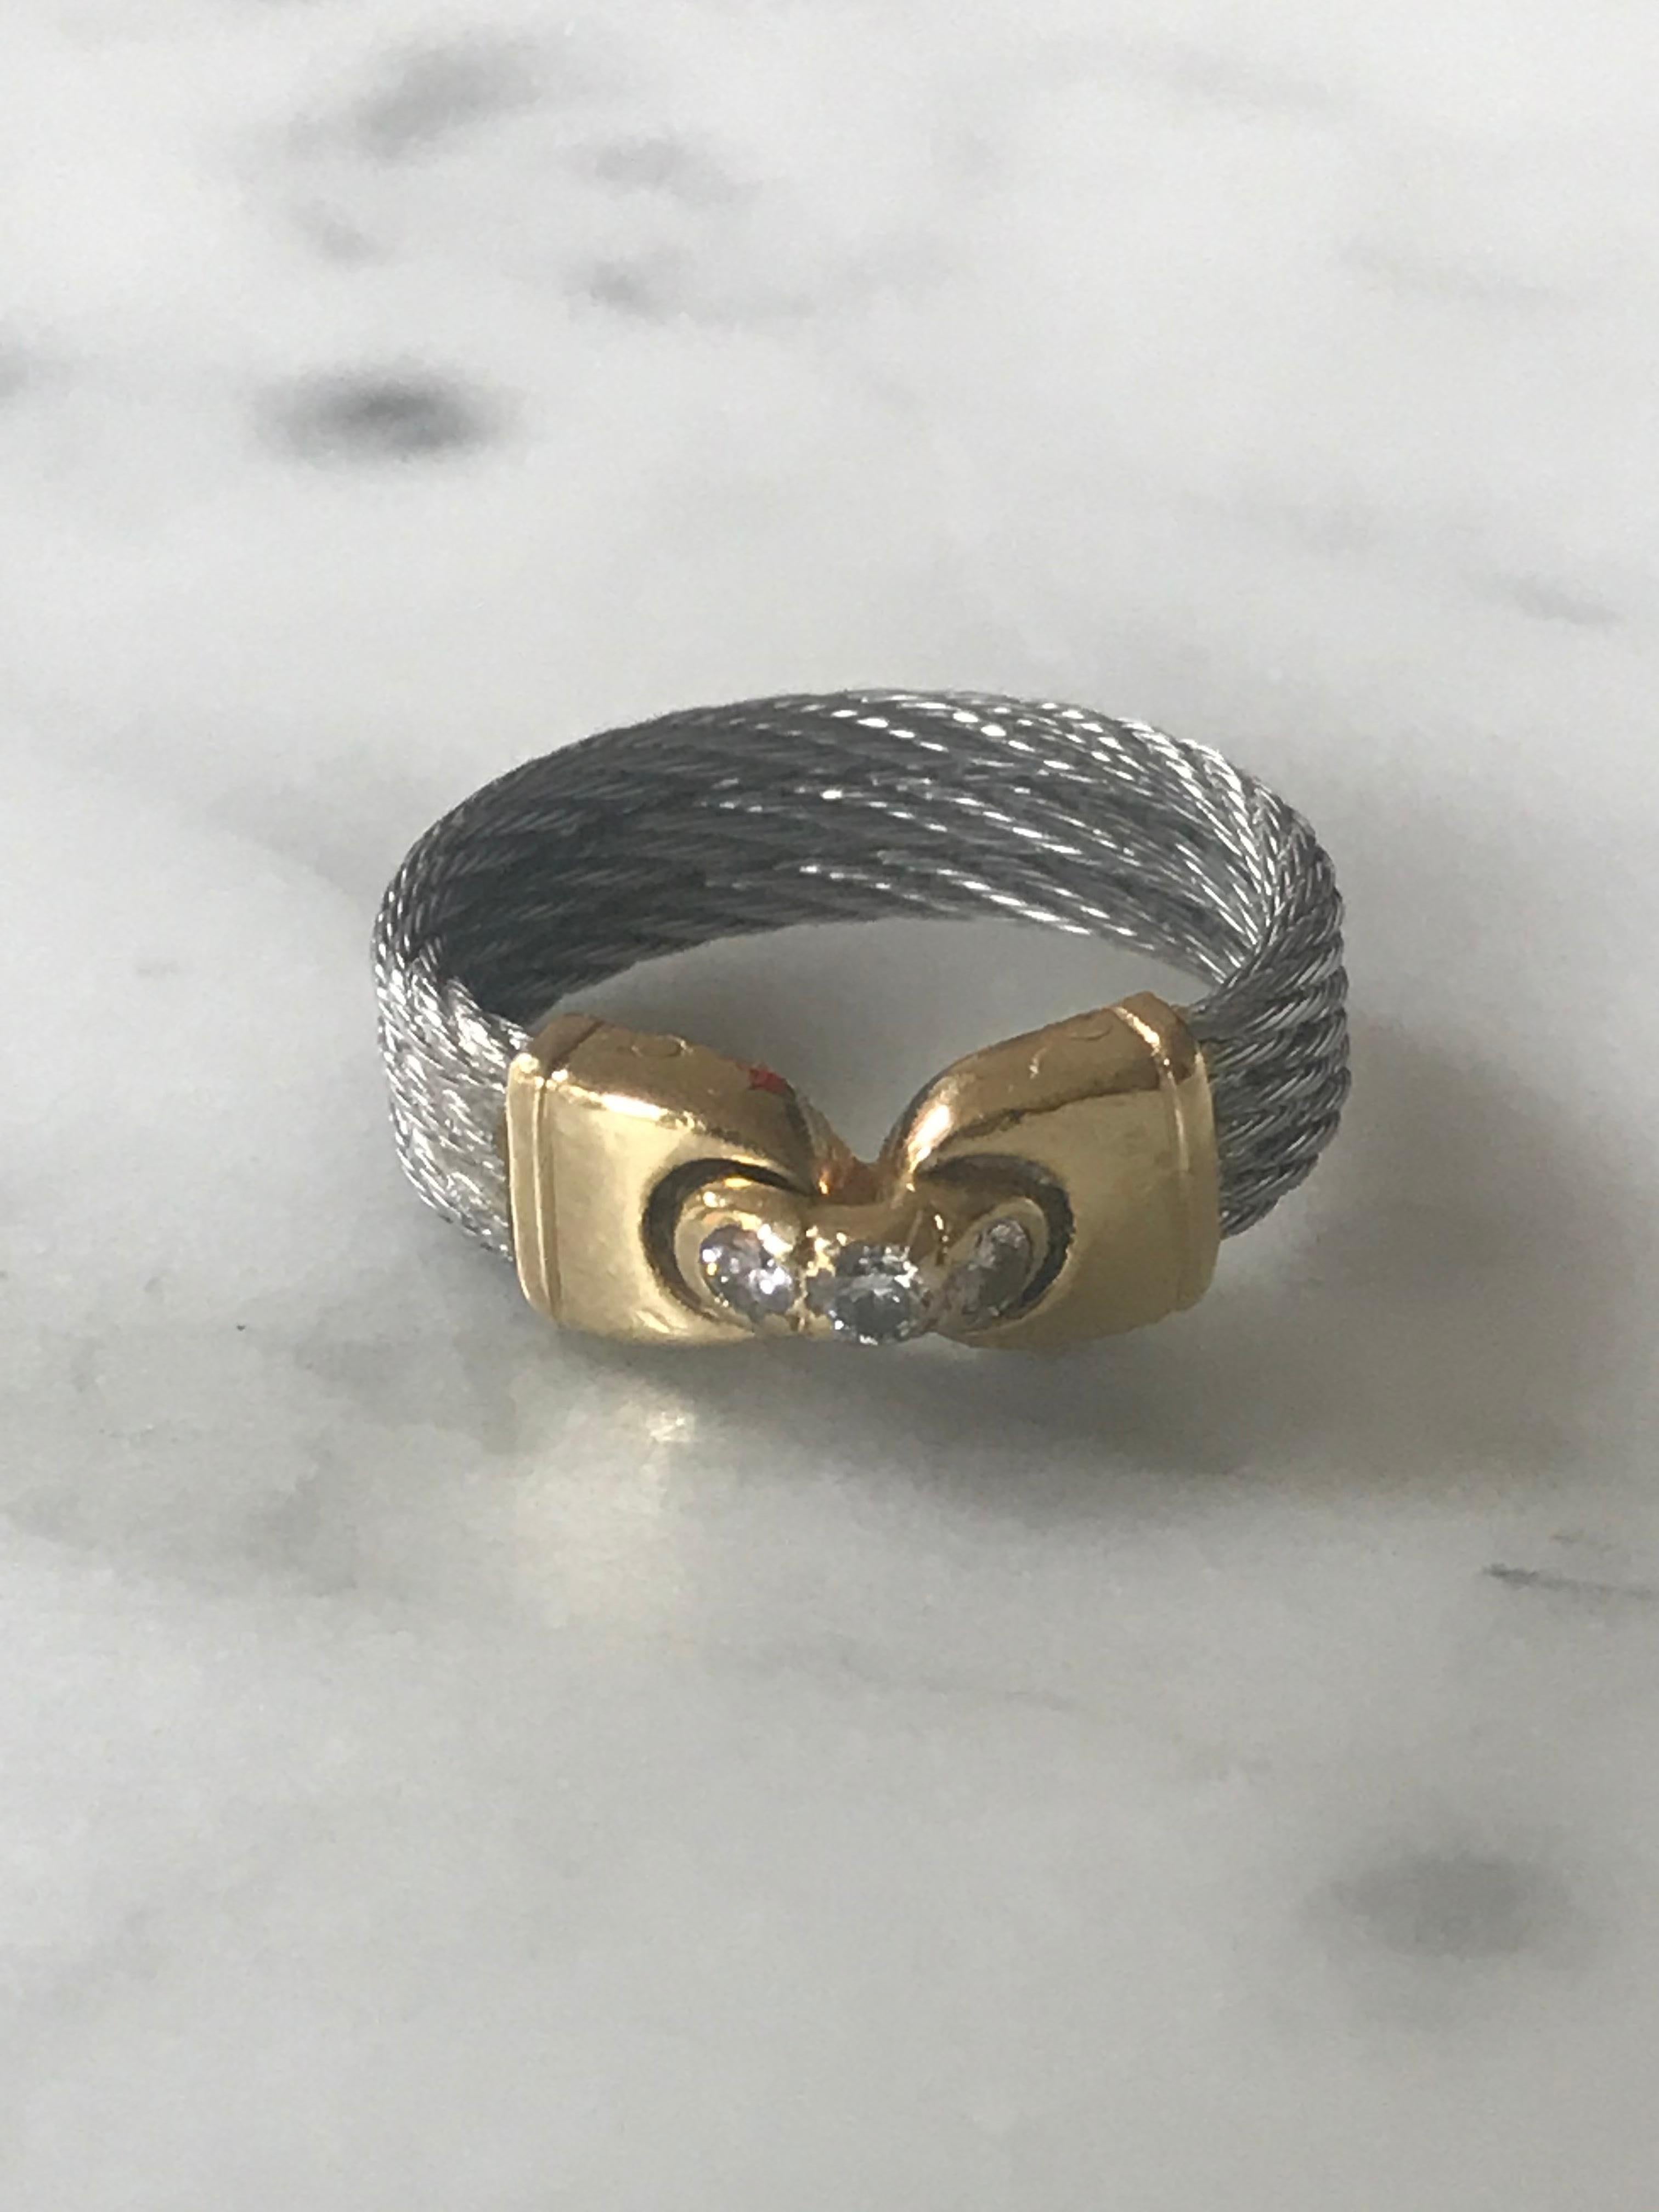 Rare Force 10 Sailing ring. Created with steel cable, 18ct gold and centre set with 3 brilliant cut diamonds. American ring size 5.5